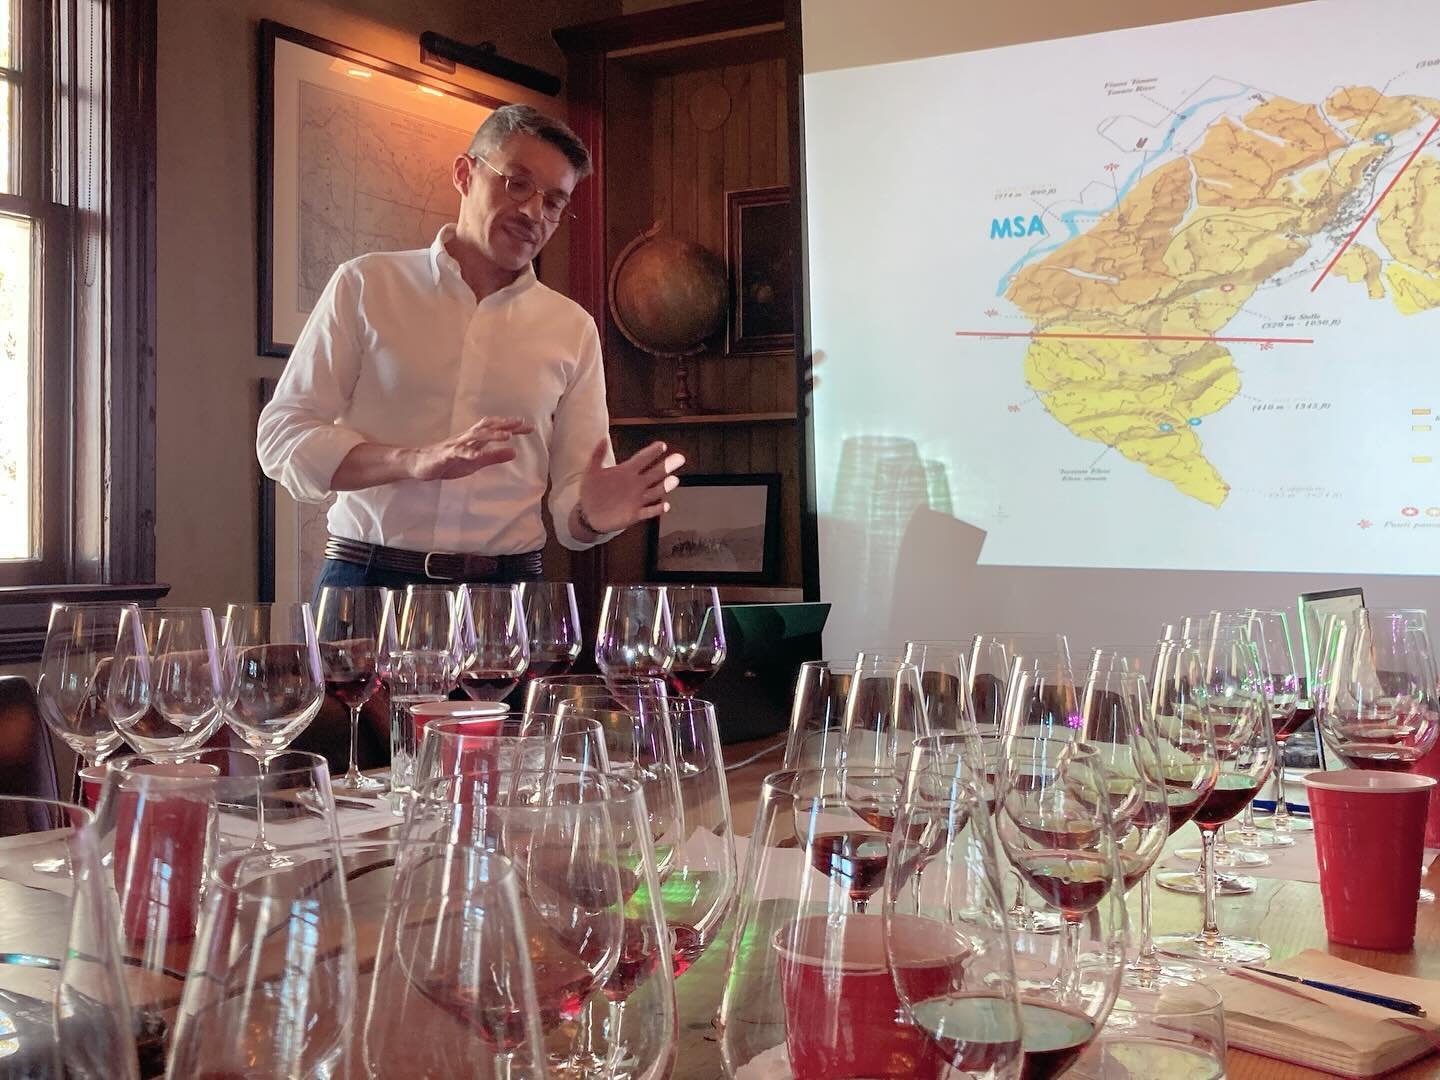 Fantastic Barolo and Barbaresco Masterclass tasting today hosted by Andrea Zarattini of Poderi Colla. It was a blind tasting where we compared 2 wines at a time, trying to determine the vintage and whether it is a Barolo or a Barbaresco. Interesting 